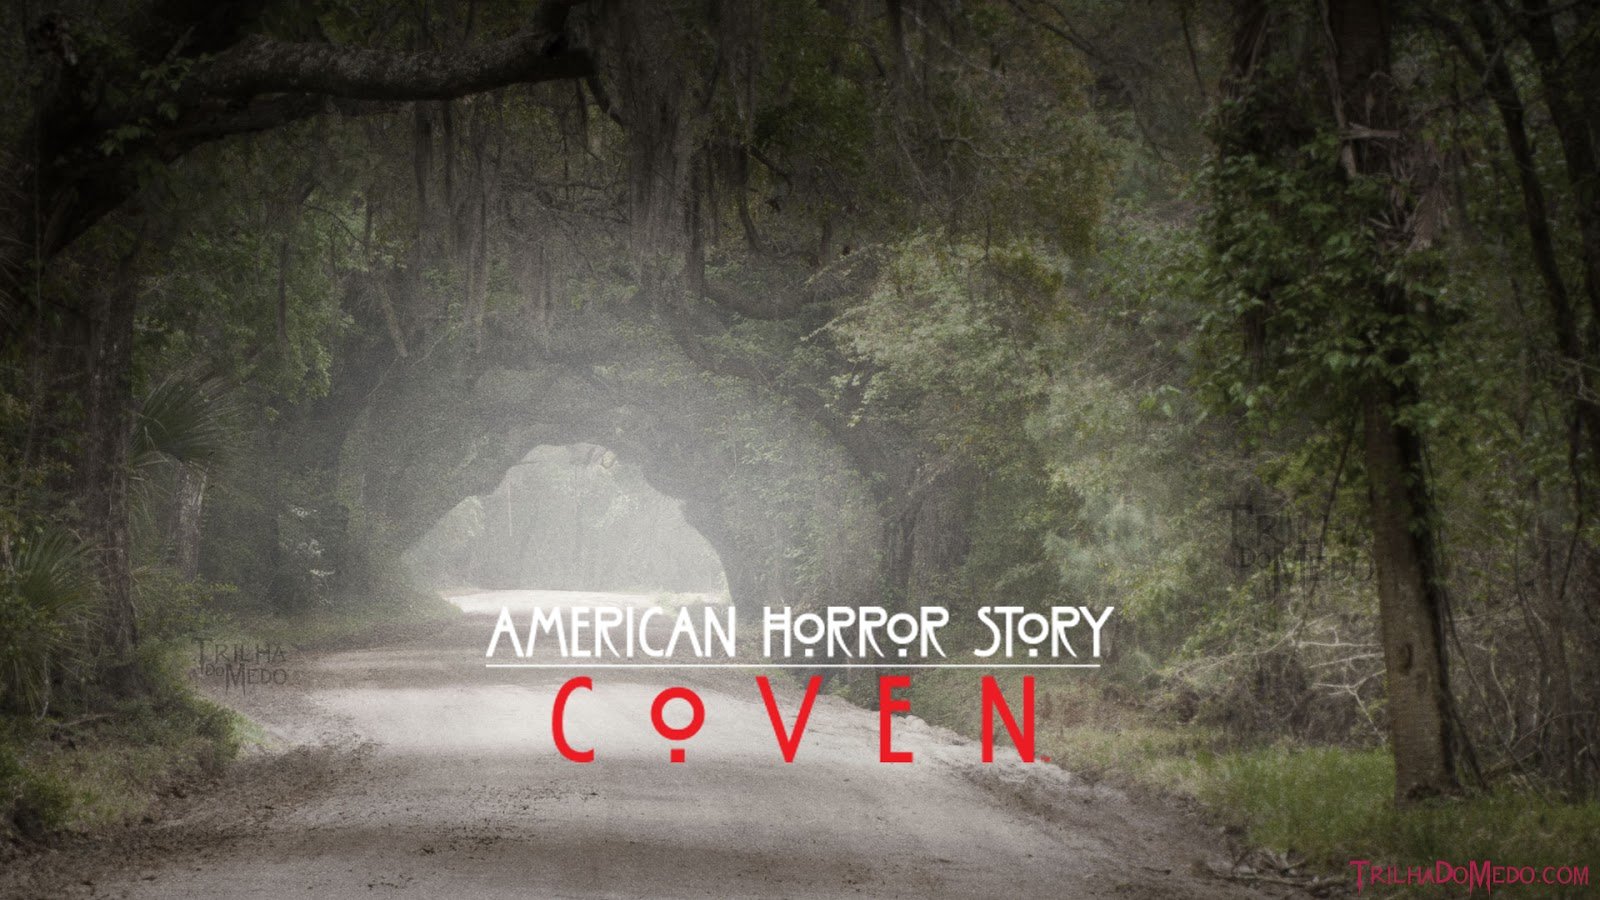 Wallpapers Exclusivos   American Horror Story Coven   Trilha Do Medo 1600x900